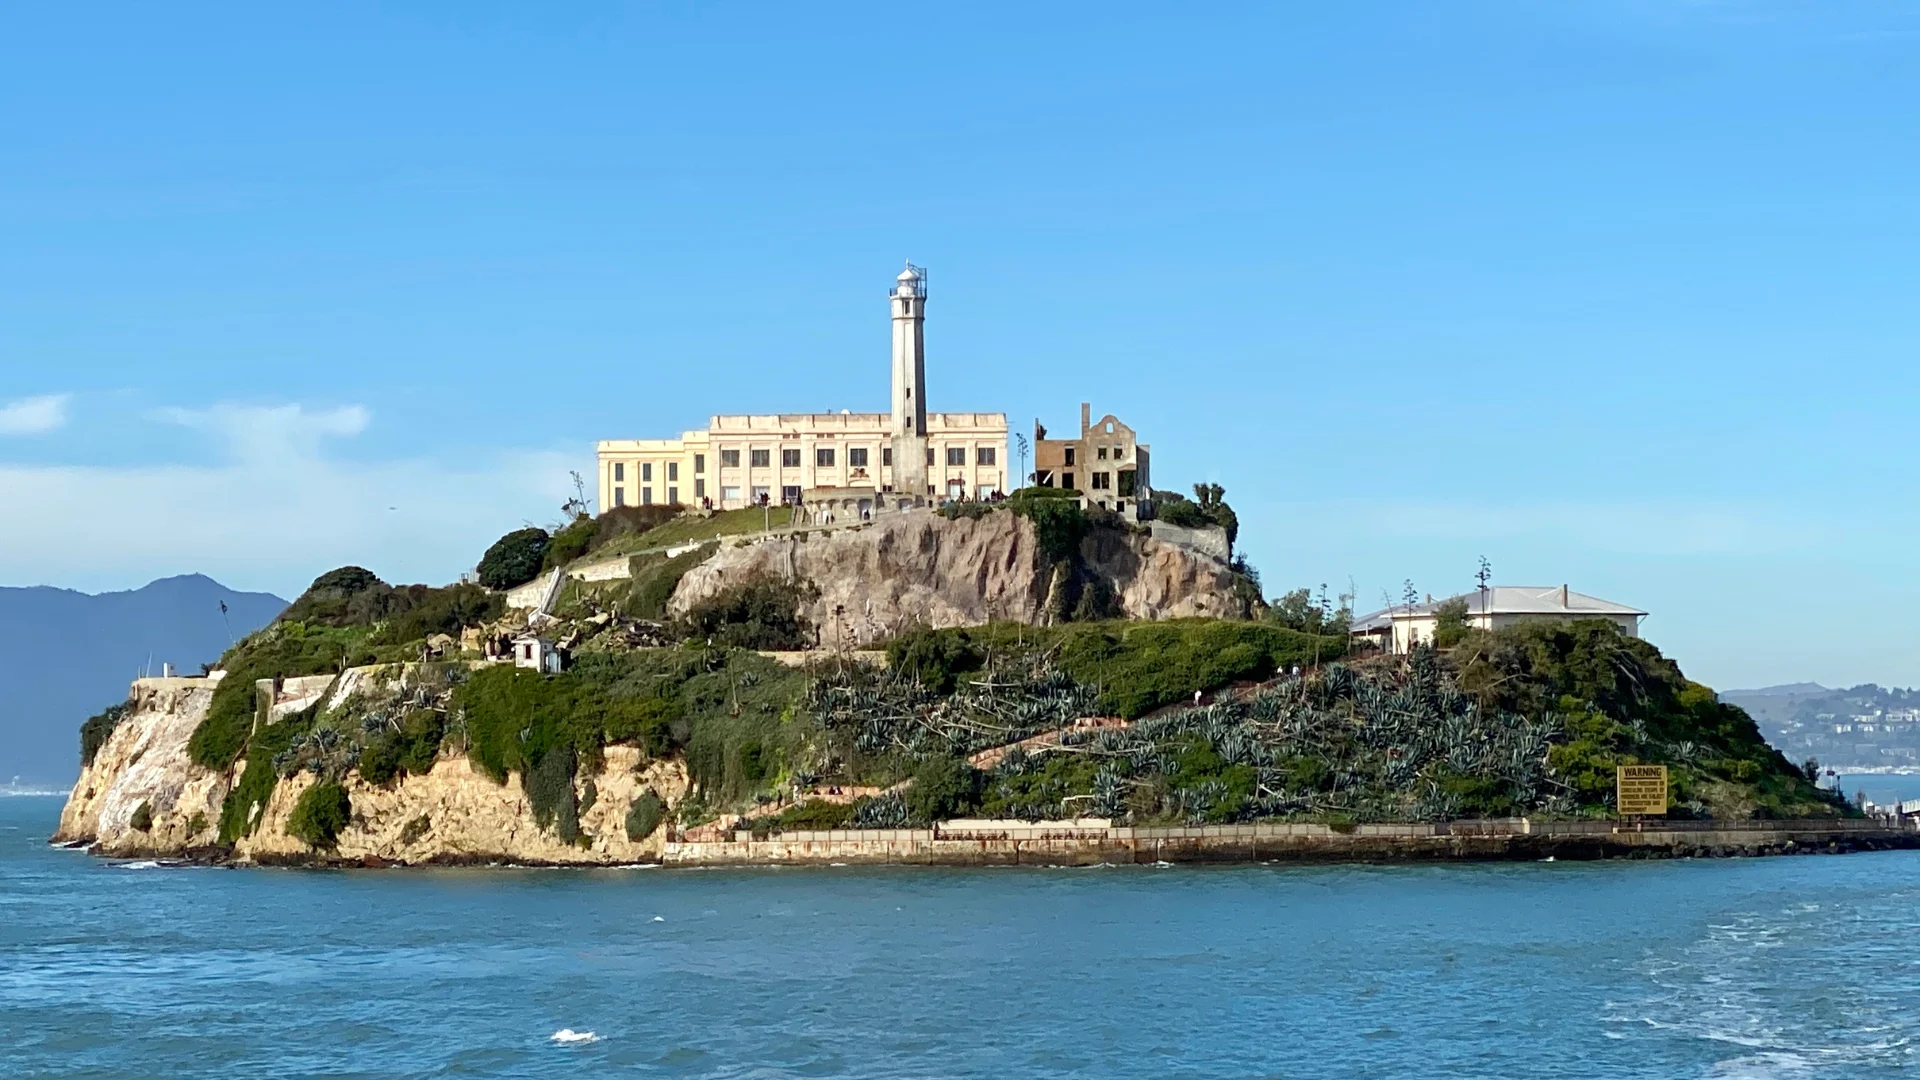 Climate change researchers have spooky experience at Alcatraz